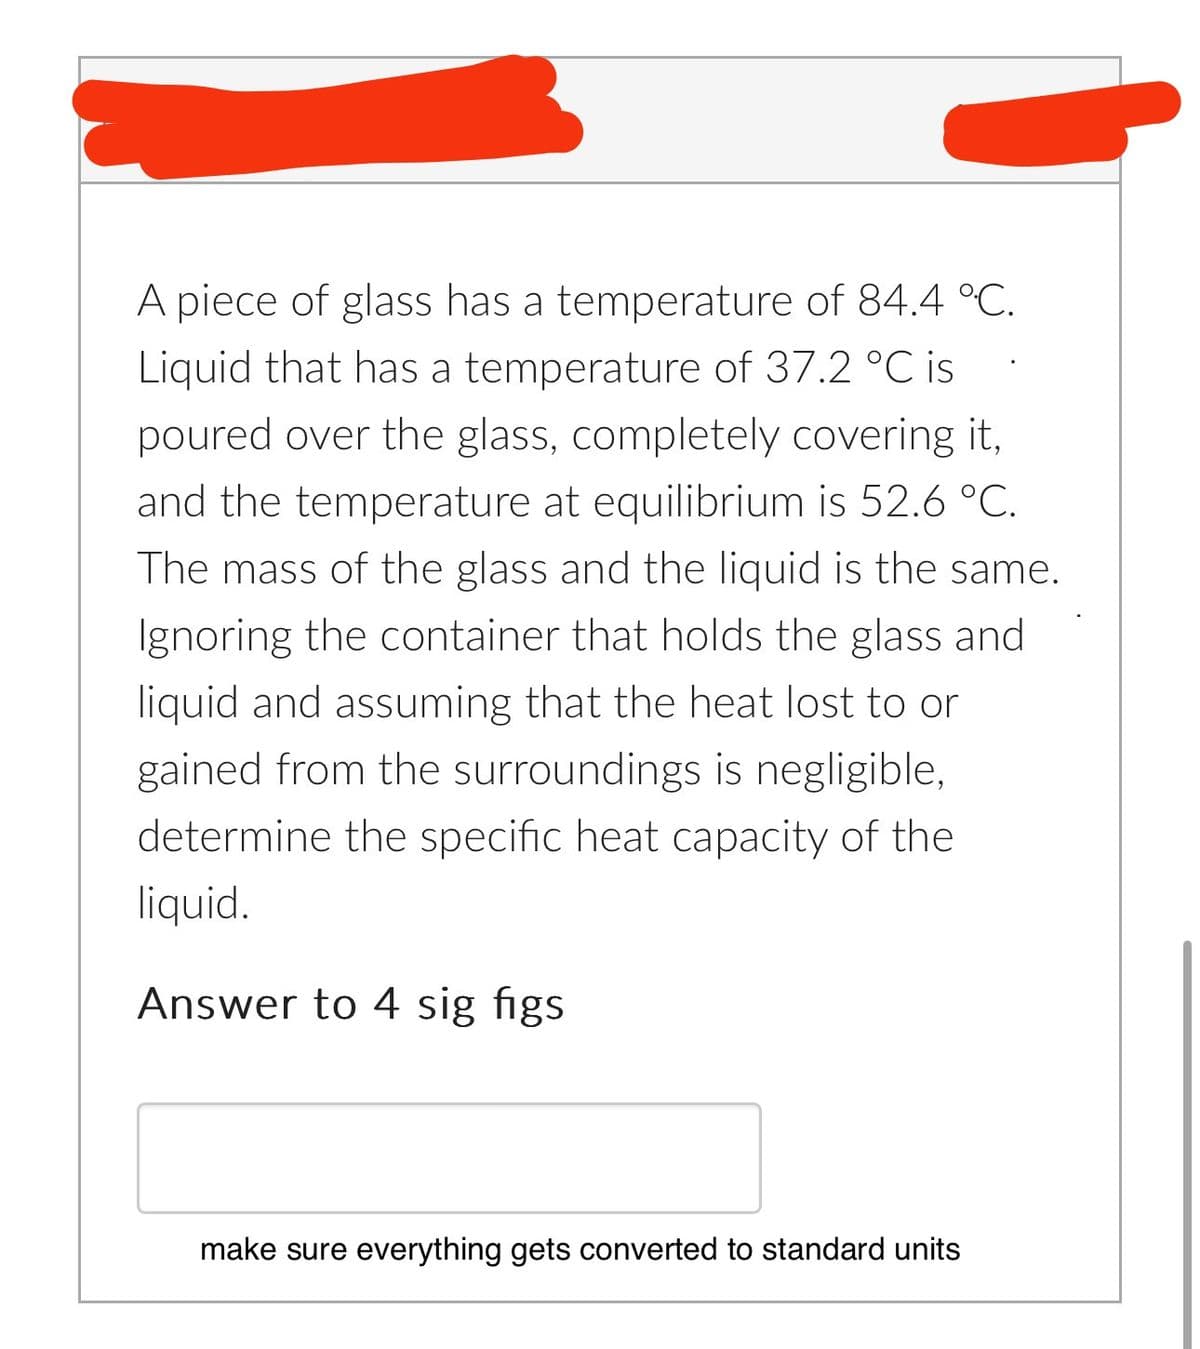 A piece of glass has a temperature of 84.4 °C.
Liquid that has a temperature of 37.2 °C is
poured over the glass, completely covering it,
and the temperature at equilibrium is 52.6 °C.
The mass of the glass and the liquid is the same.
Ignoring the container that holds the glass and
liquid and assuming that the heat lost to or
gained from the surroundings is negligible,
determine the specific heat capacity of the
liquid.
Answer to 4 sig figs.
make sure everything gets converted to standard units